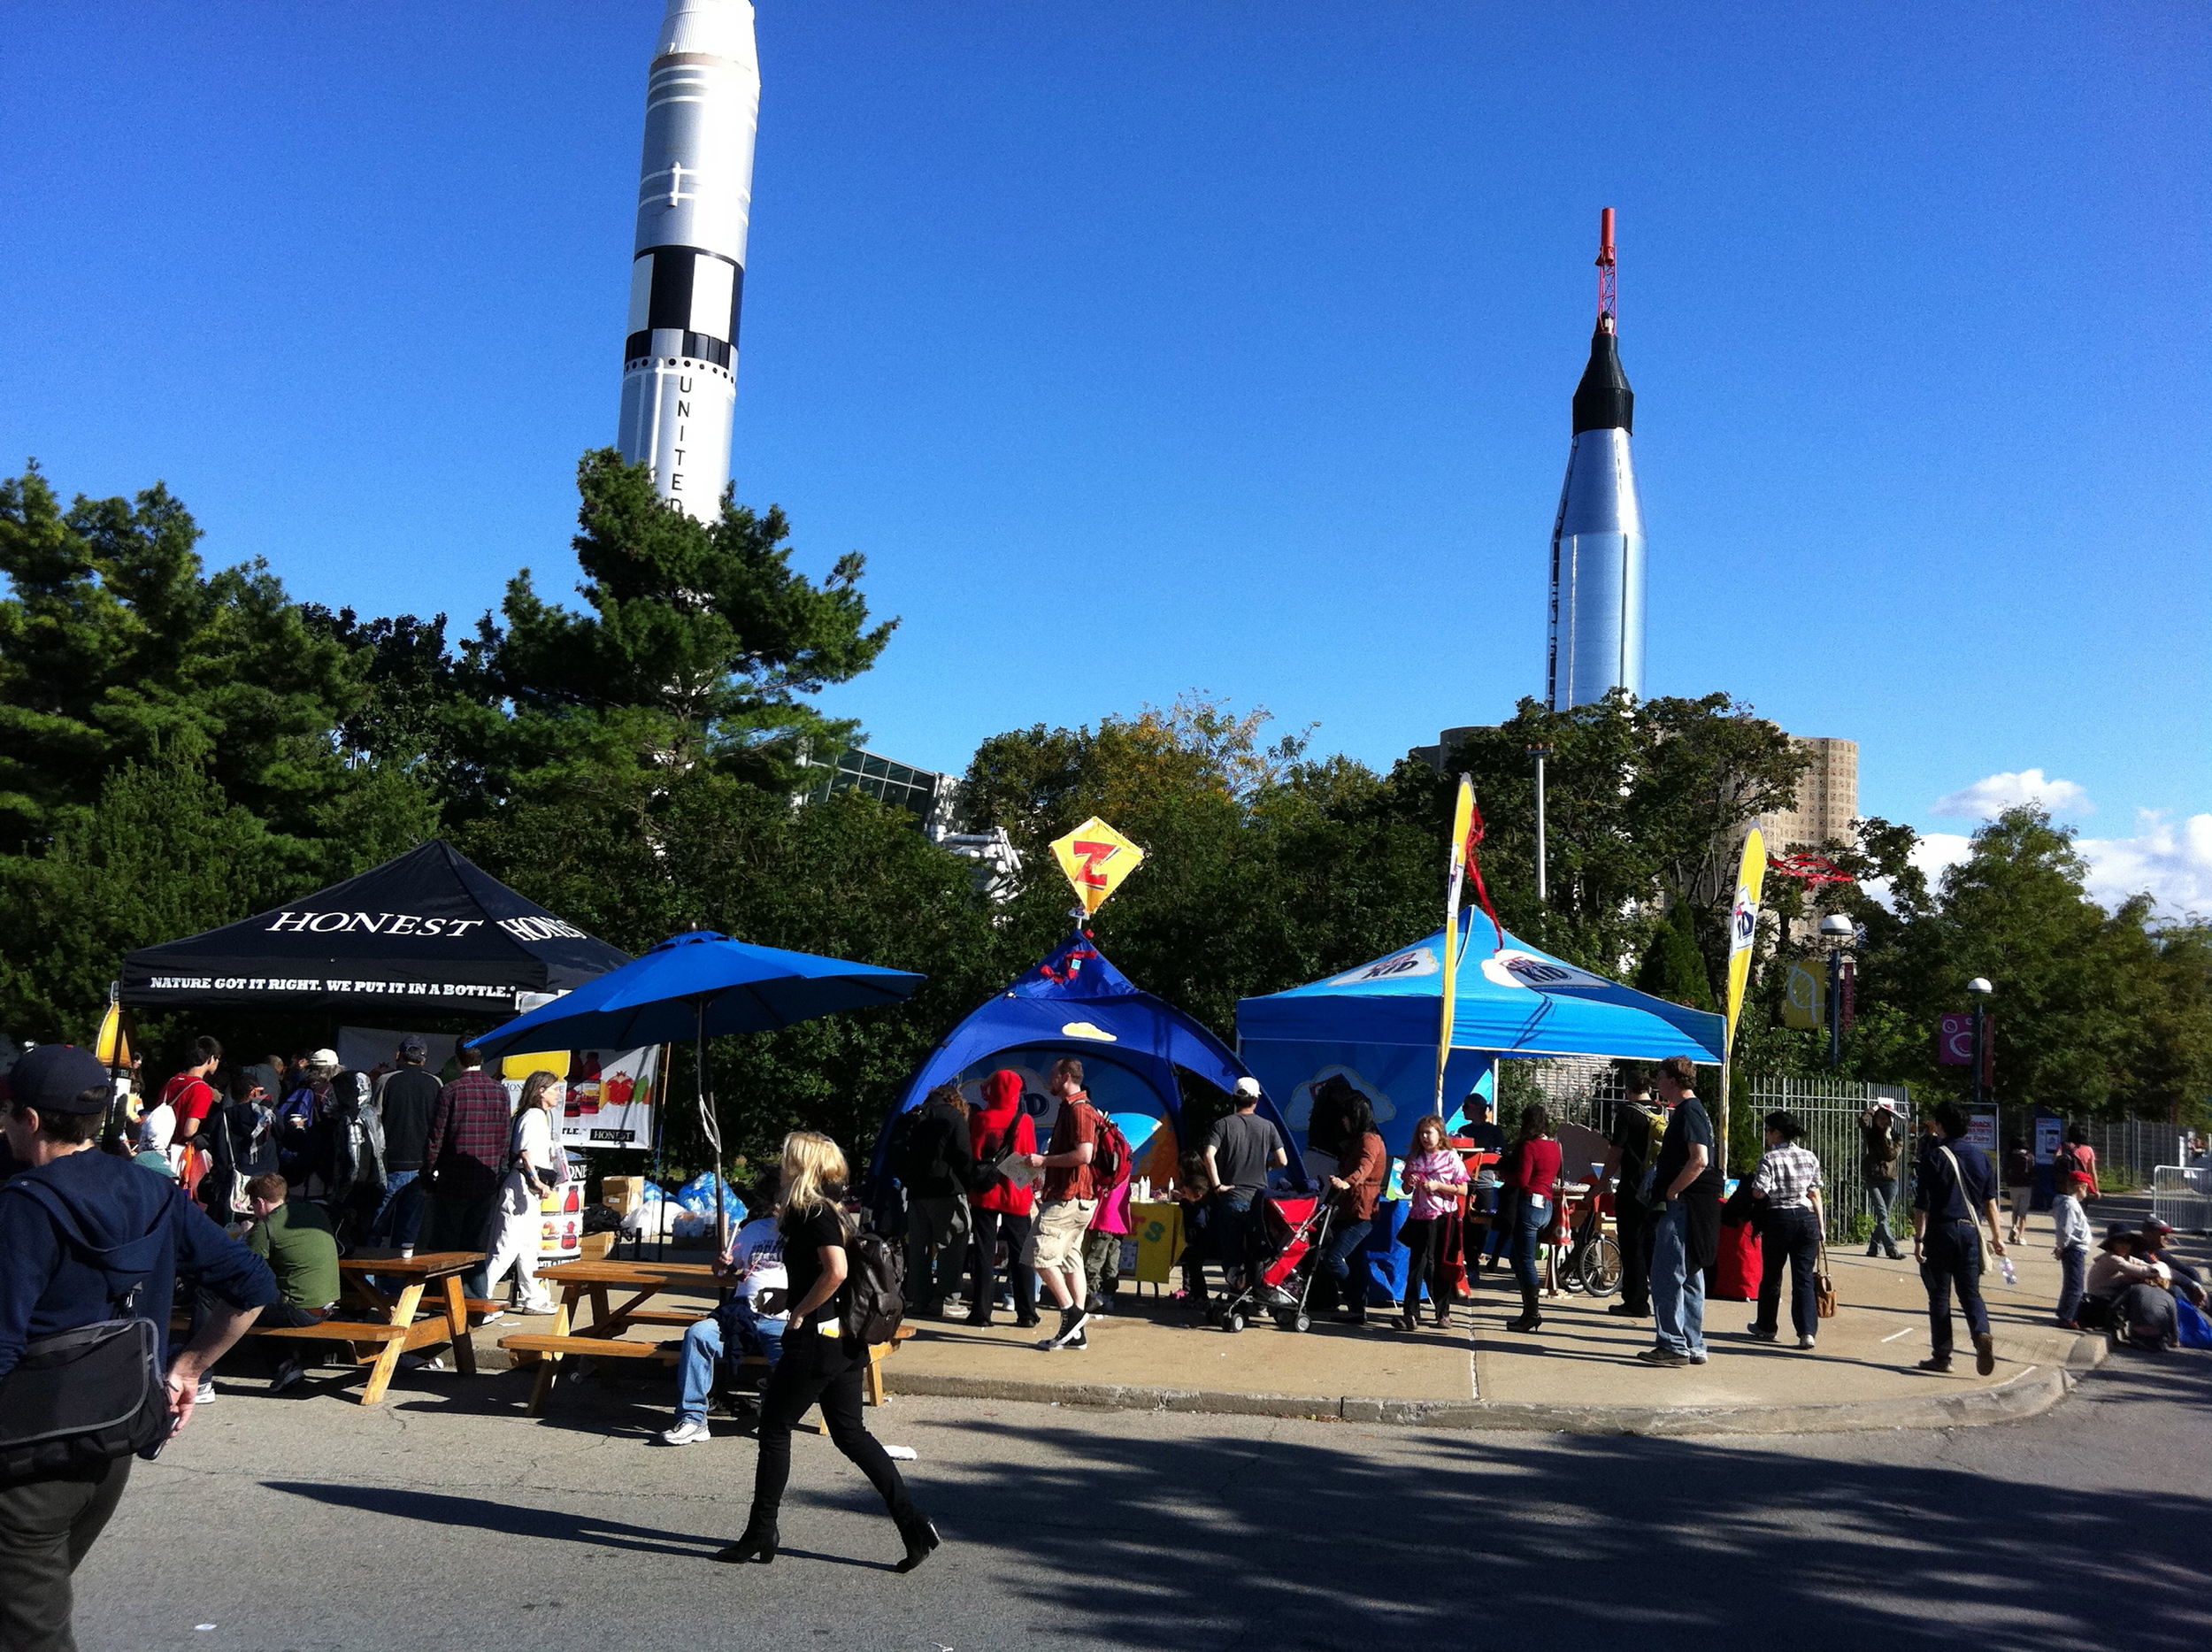 I went to Maker Faire. It's one part technology trade show and one part carnival sideshow.